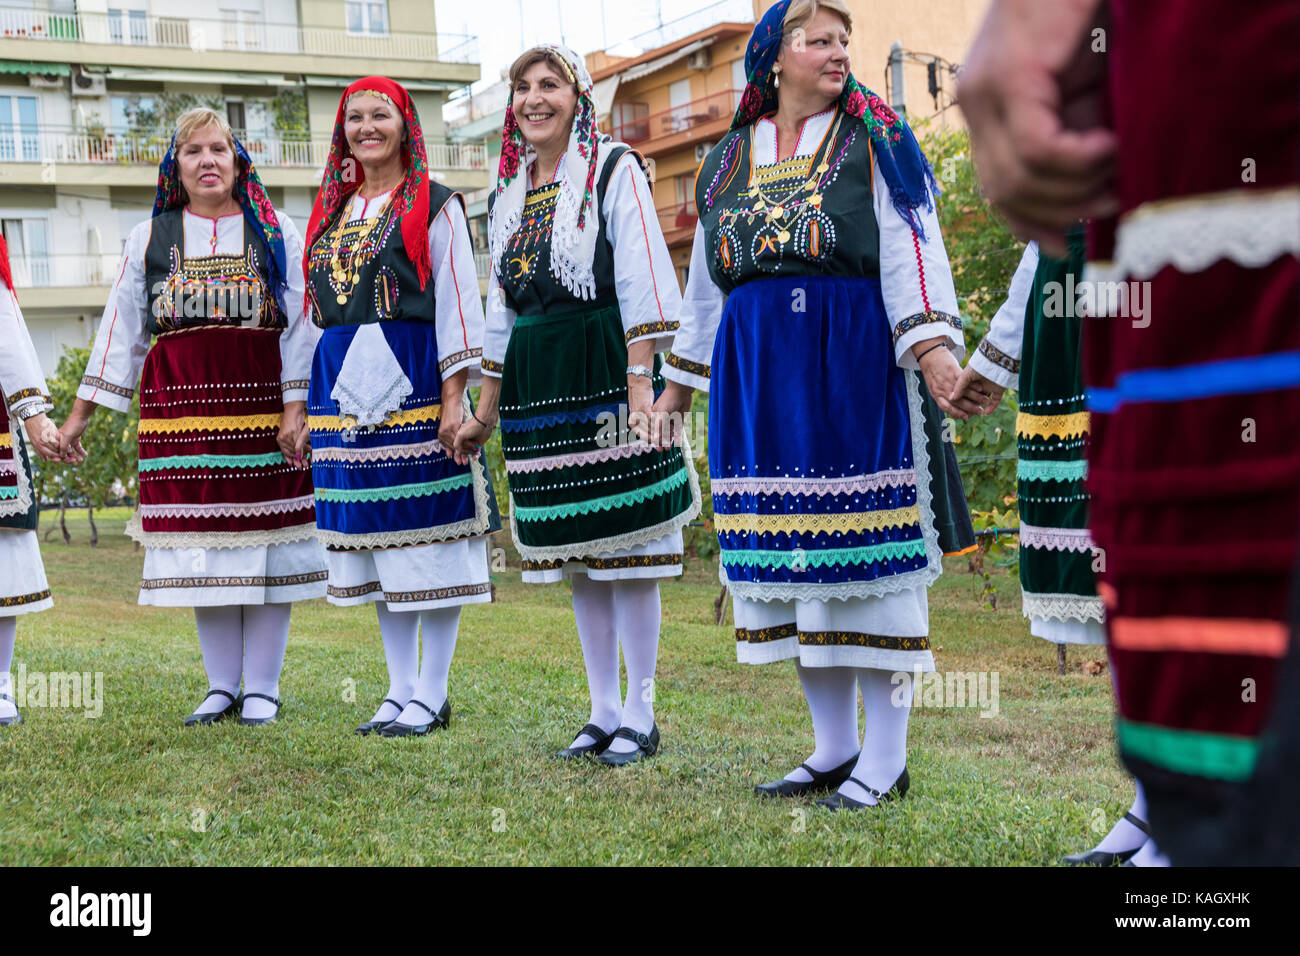 Thessaloniki, Greece - Sept  21, 2017: Group performing Greek folklore dance during the harvest season Stock Photo